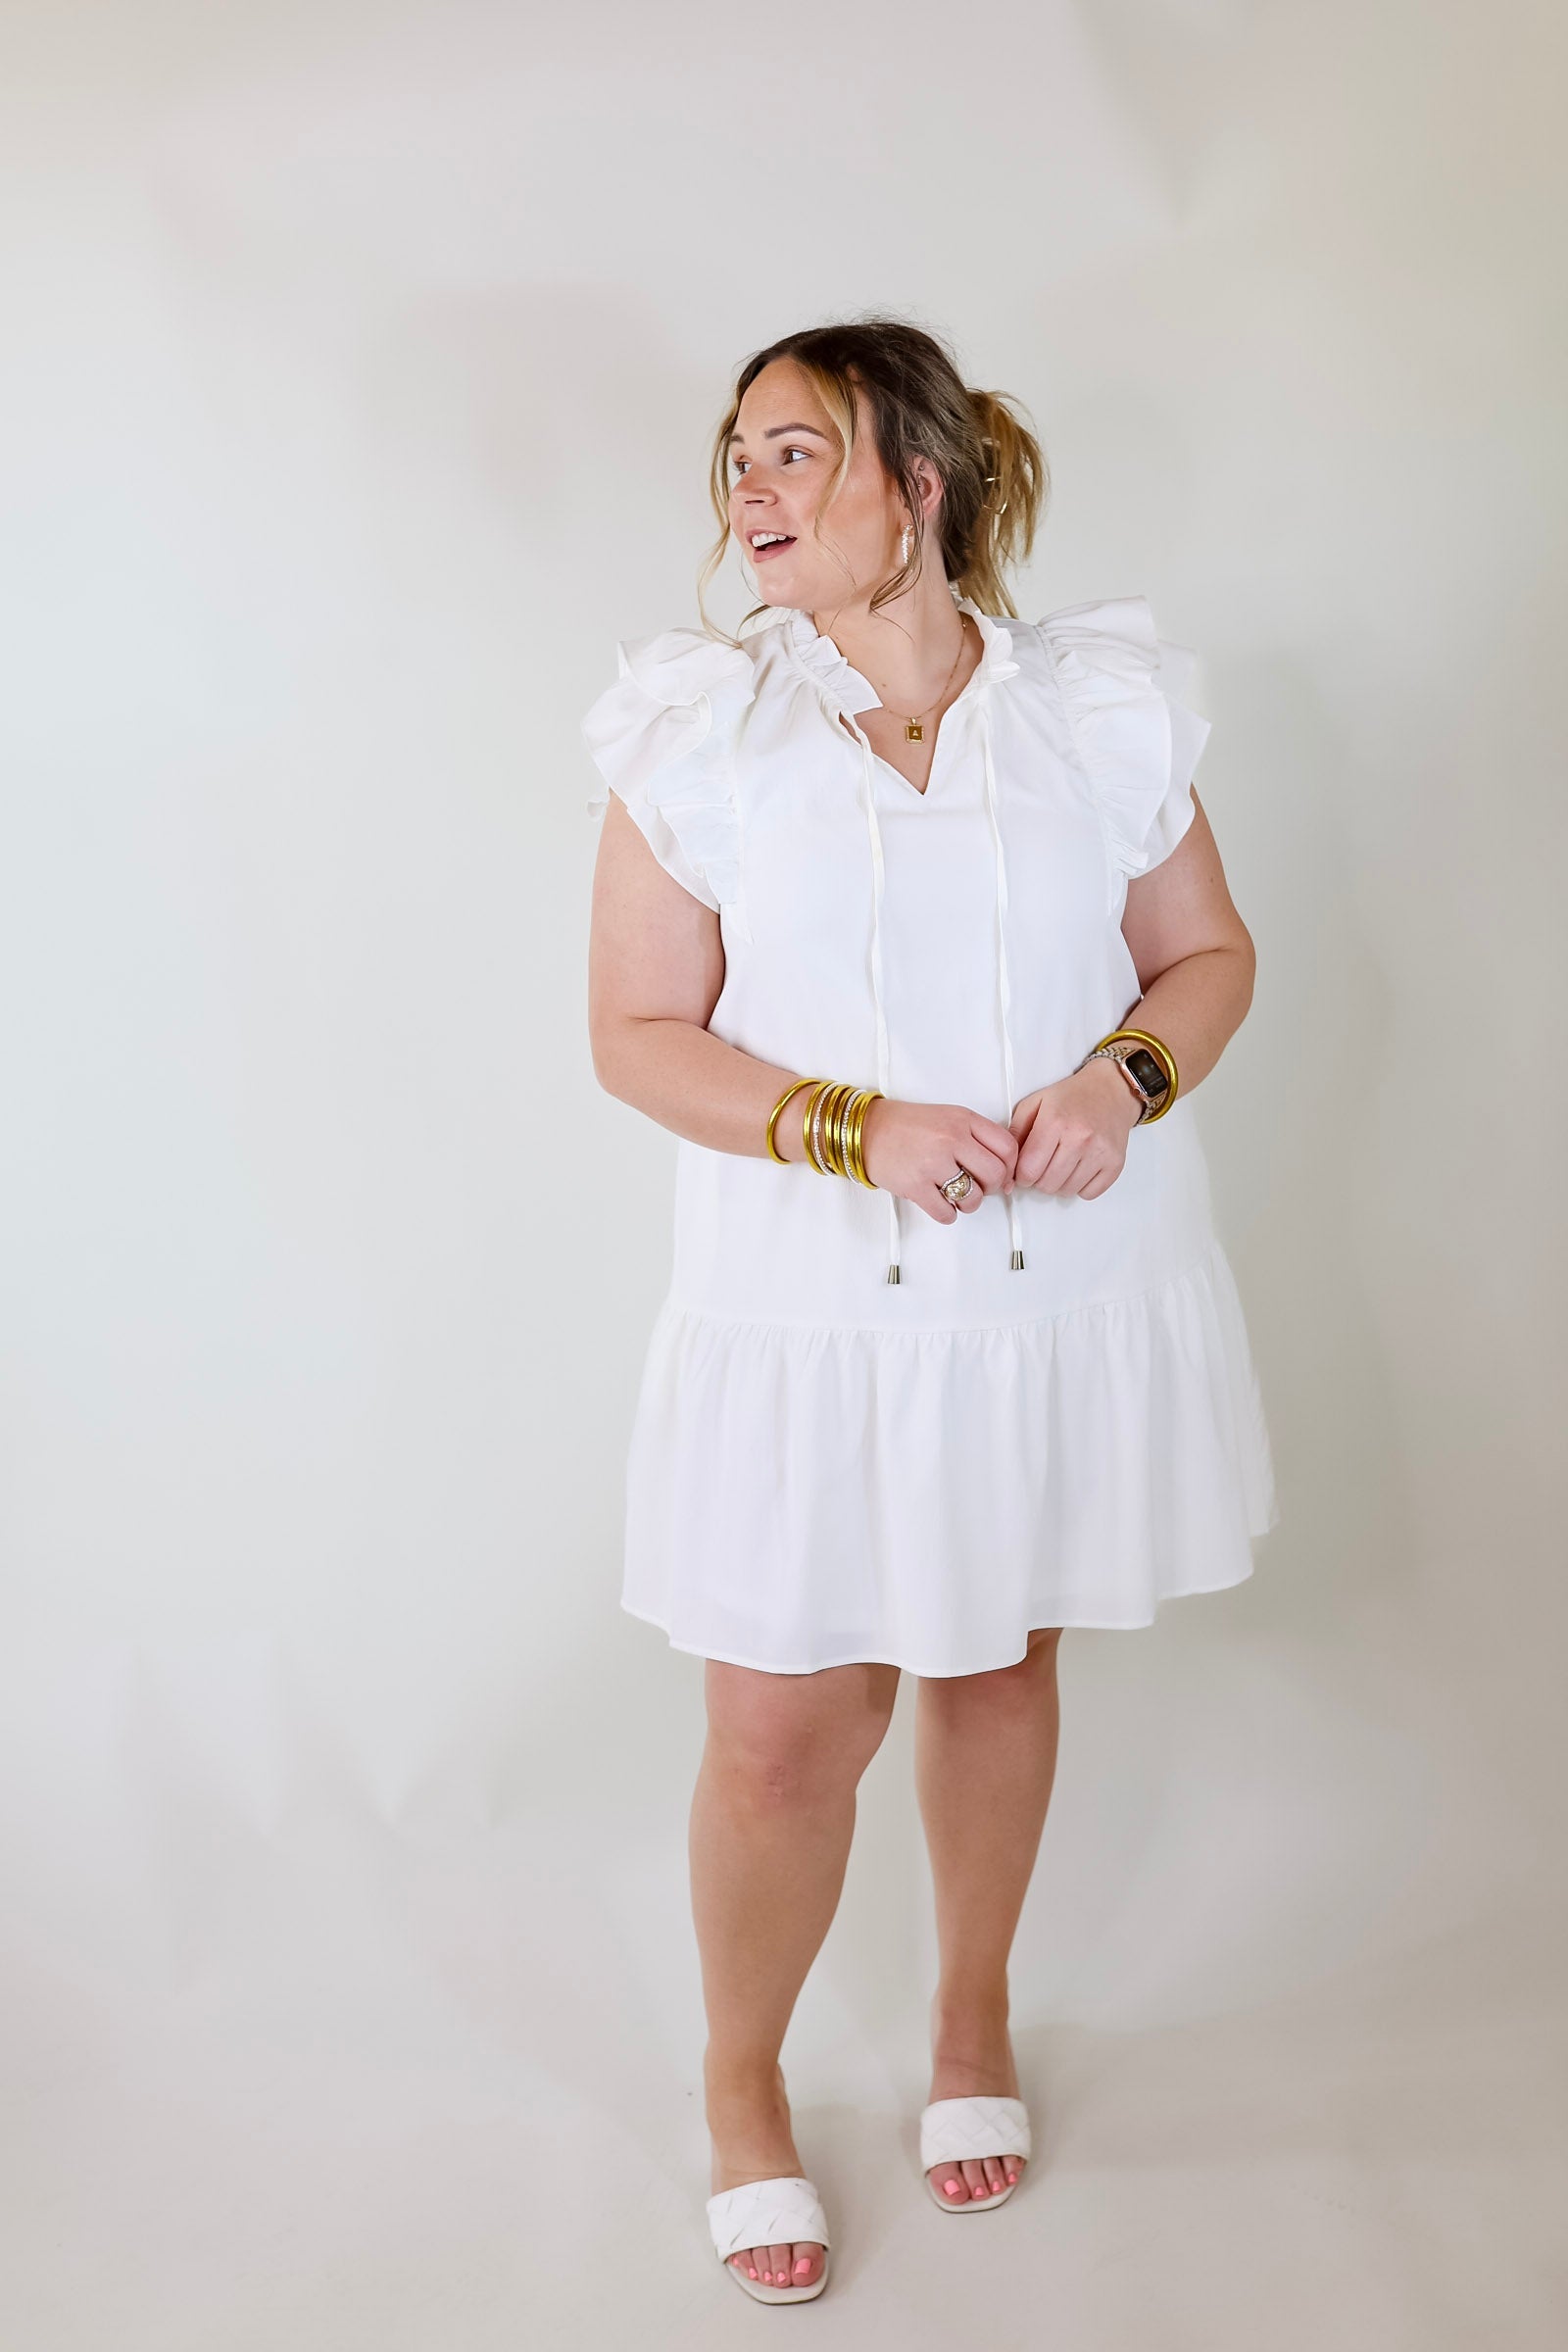 Powerful Love Ruffle Cap Sleeve Dress with Keyhole and Tie Neckline in Ivory - Giddy Up Glamour Boutique